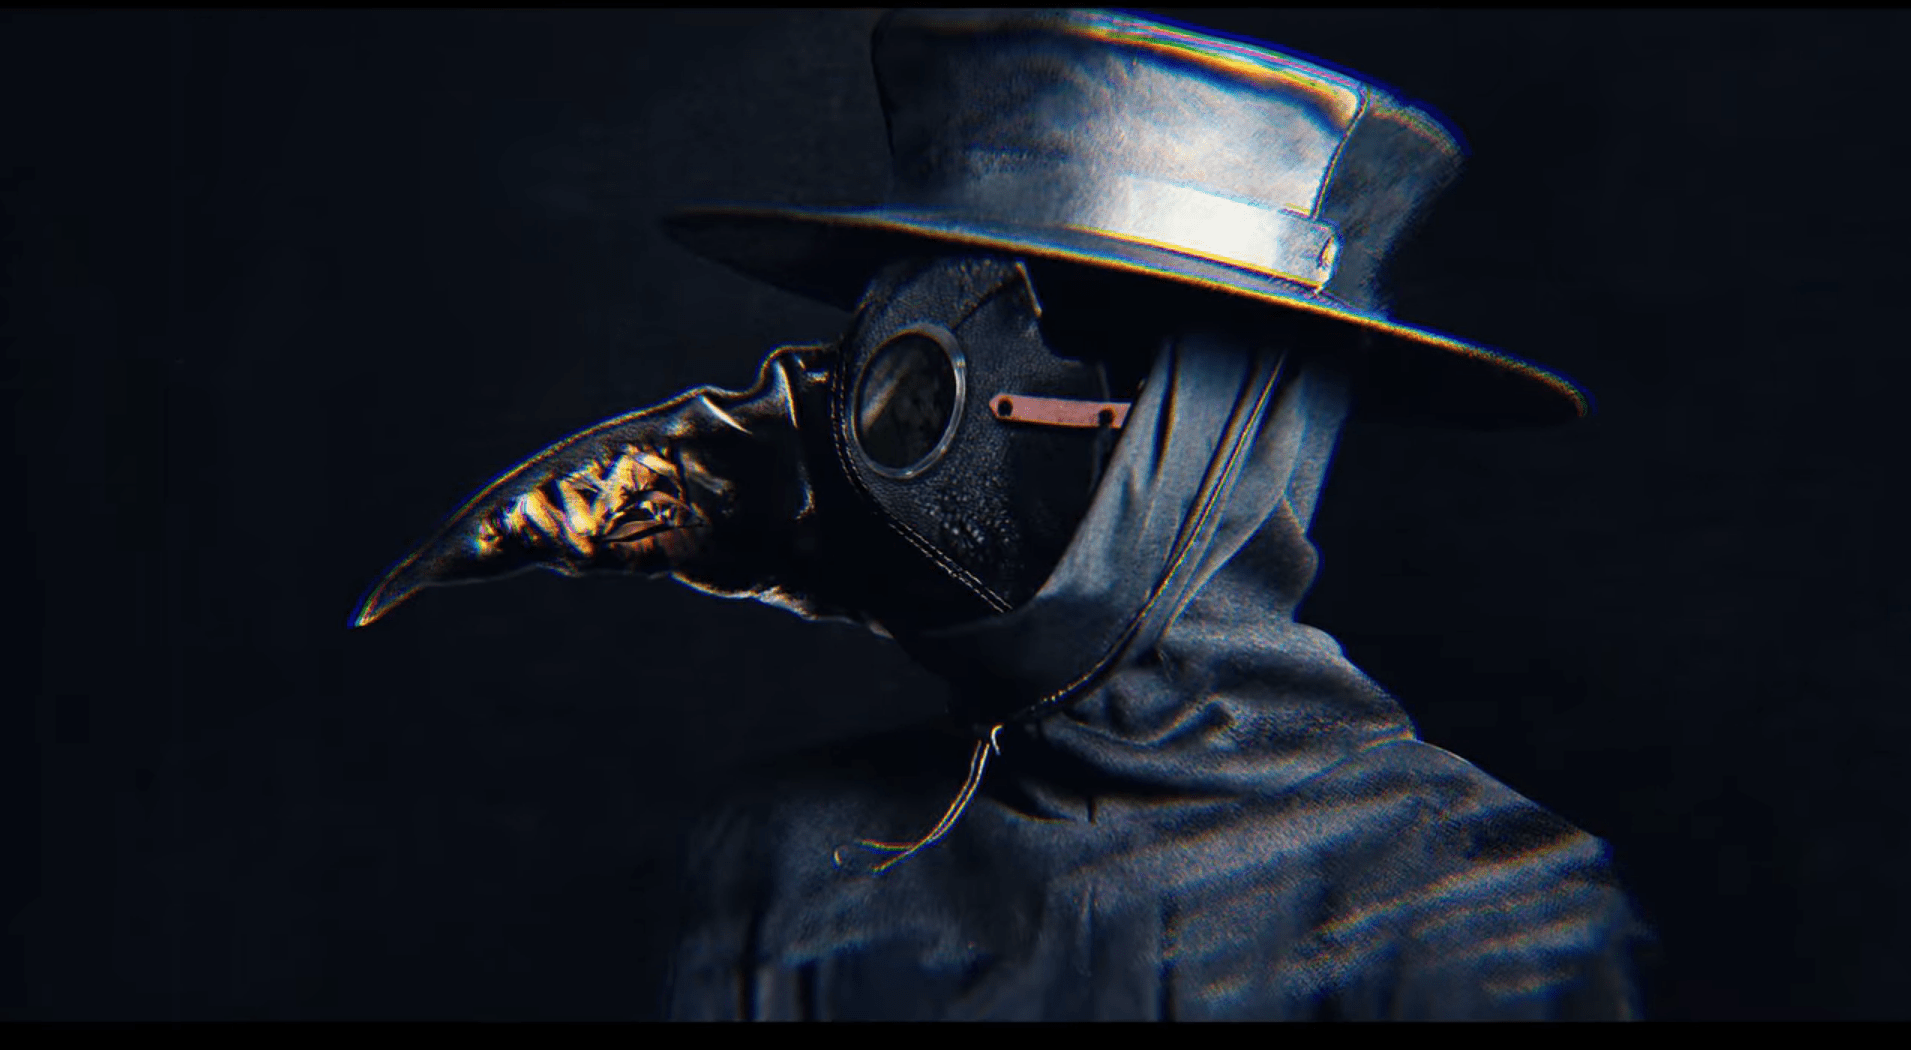 medieval plague doctor